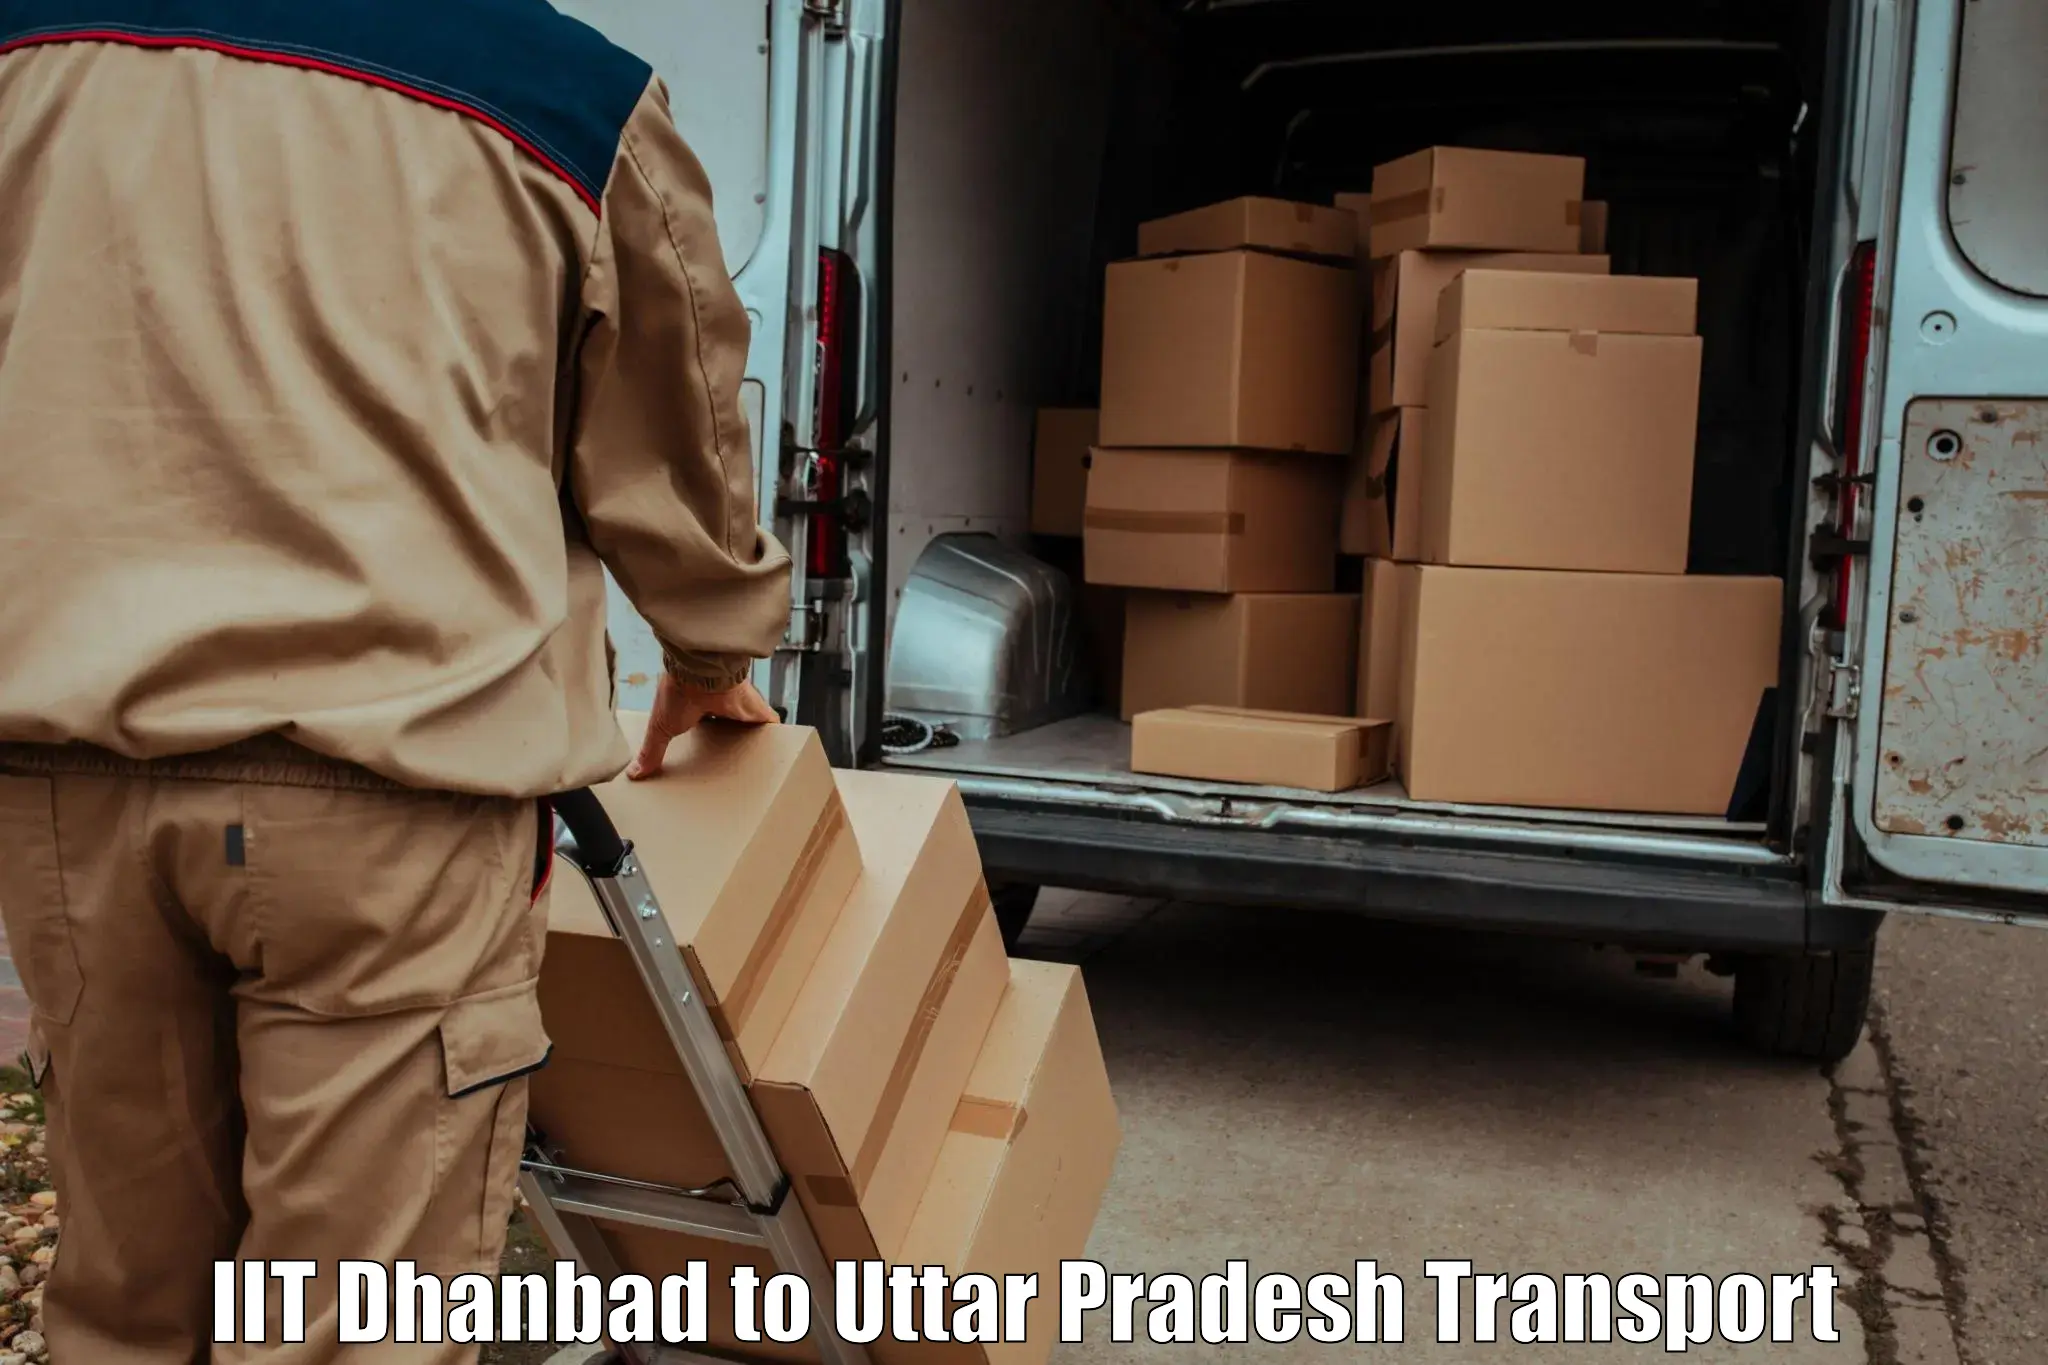 Daily parcel service transport in IIT Dhanbad to Hapur